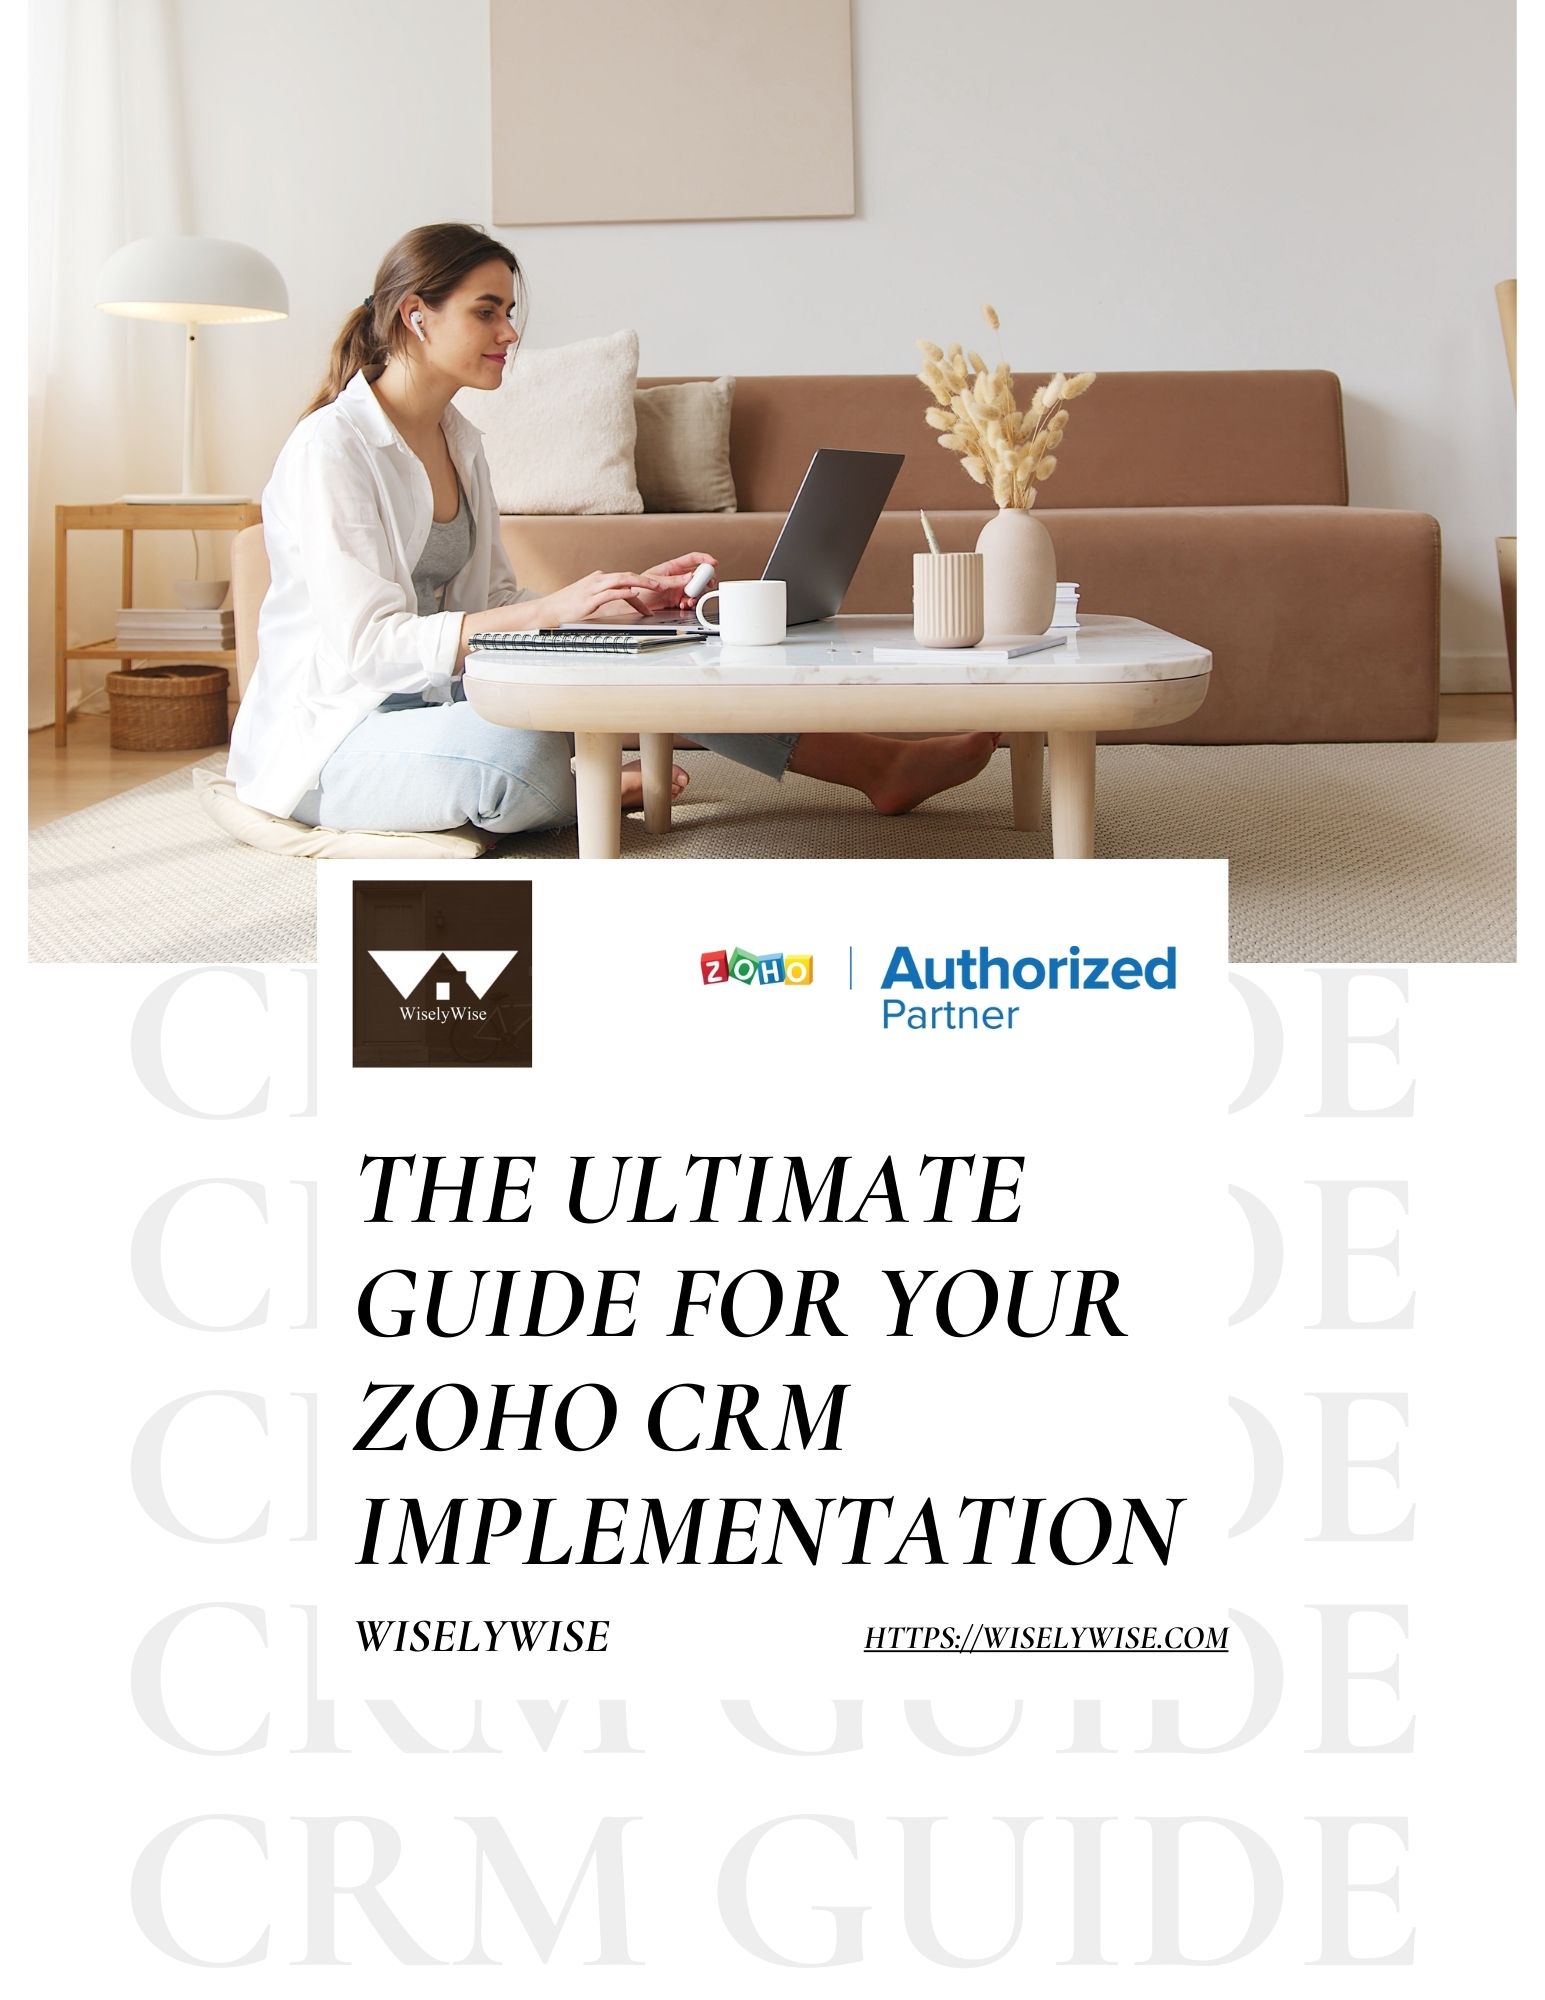 zoho crm implementation wiselywise